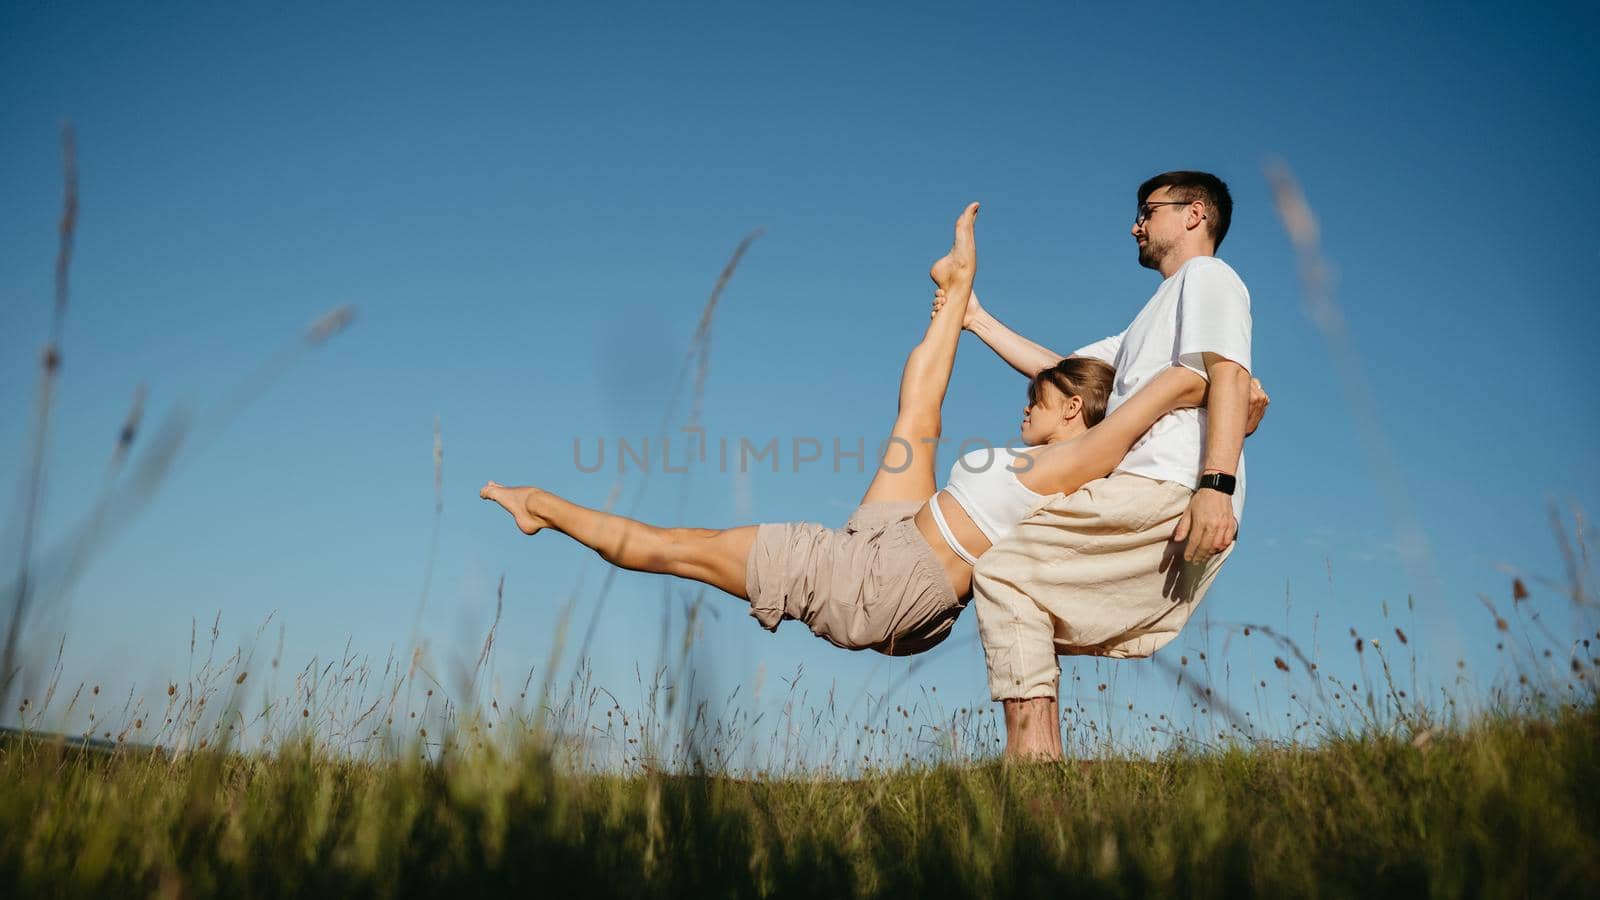 Man and Woman Dressed Alike Doing Difficult Pose While Practicing Yoga Outdoors in the Field with Blue Sky on Background